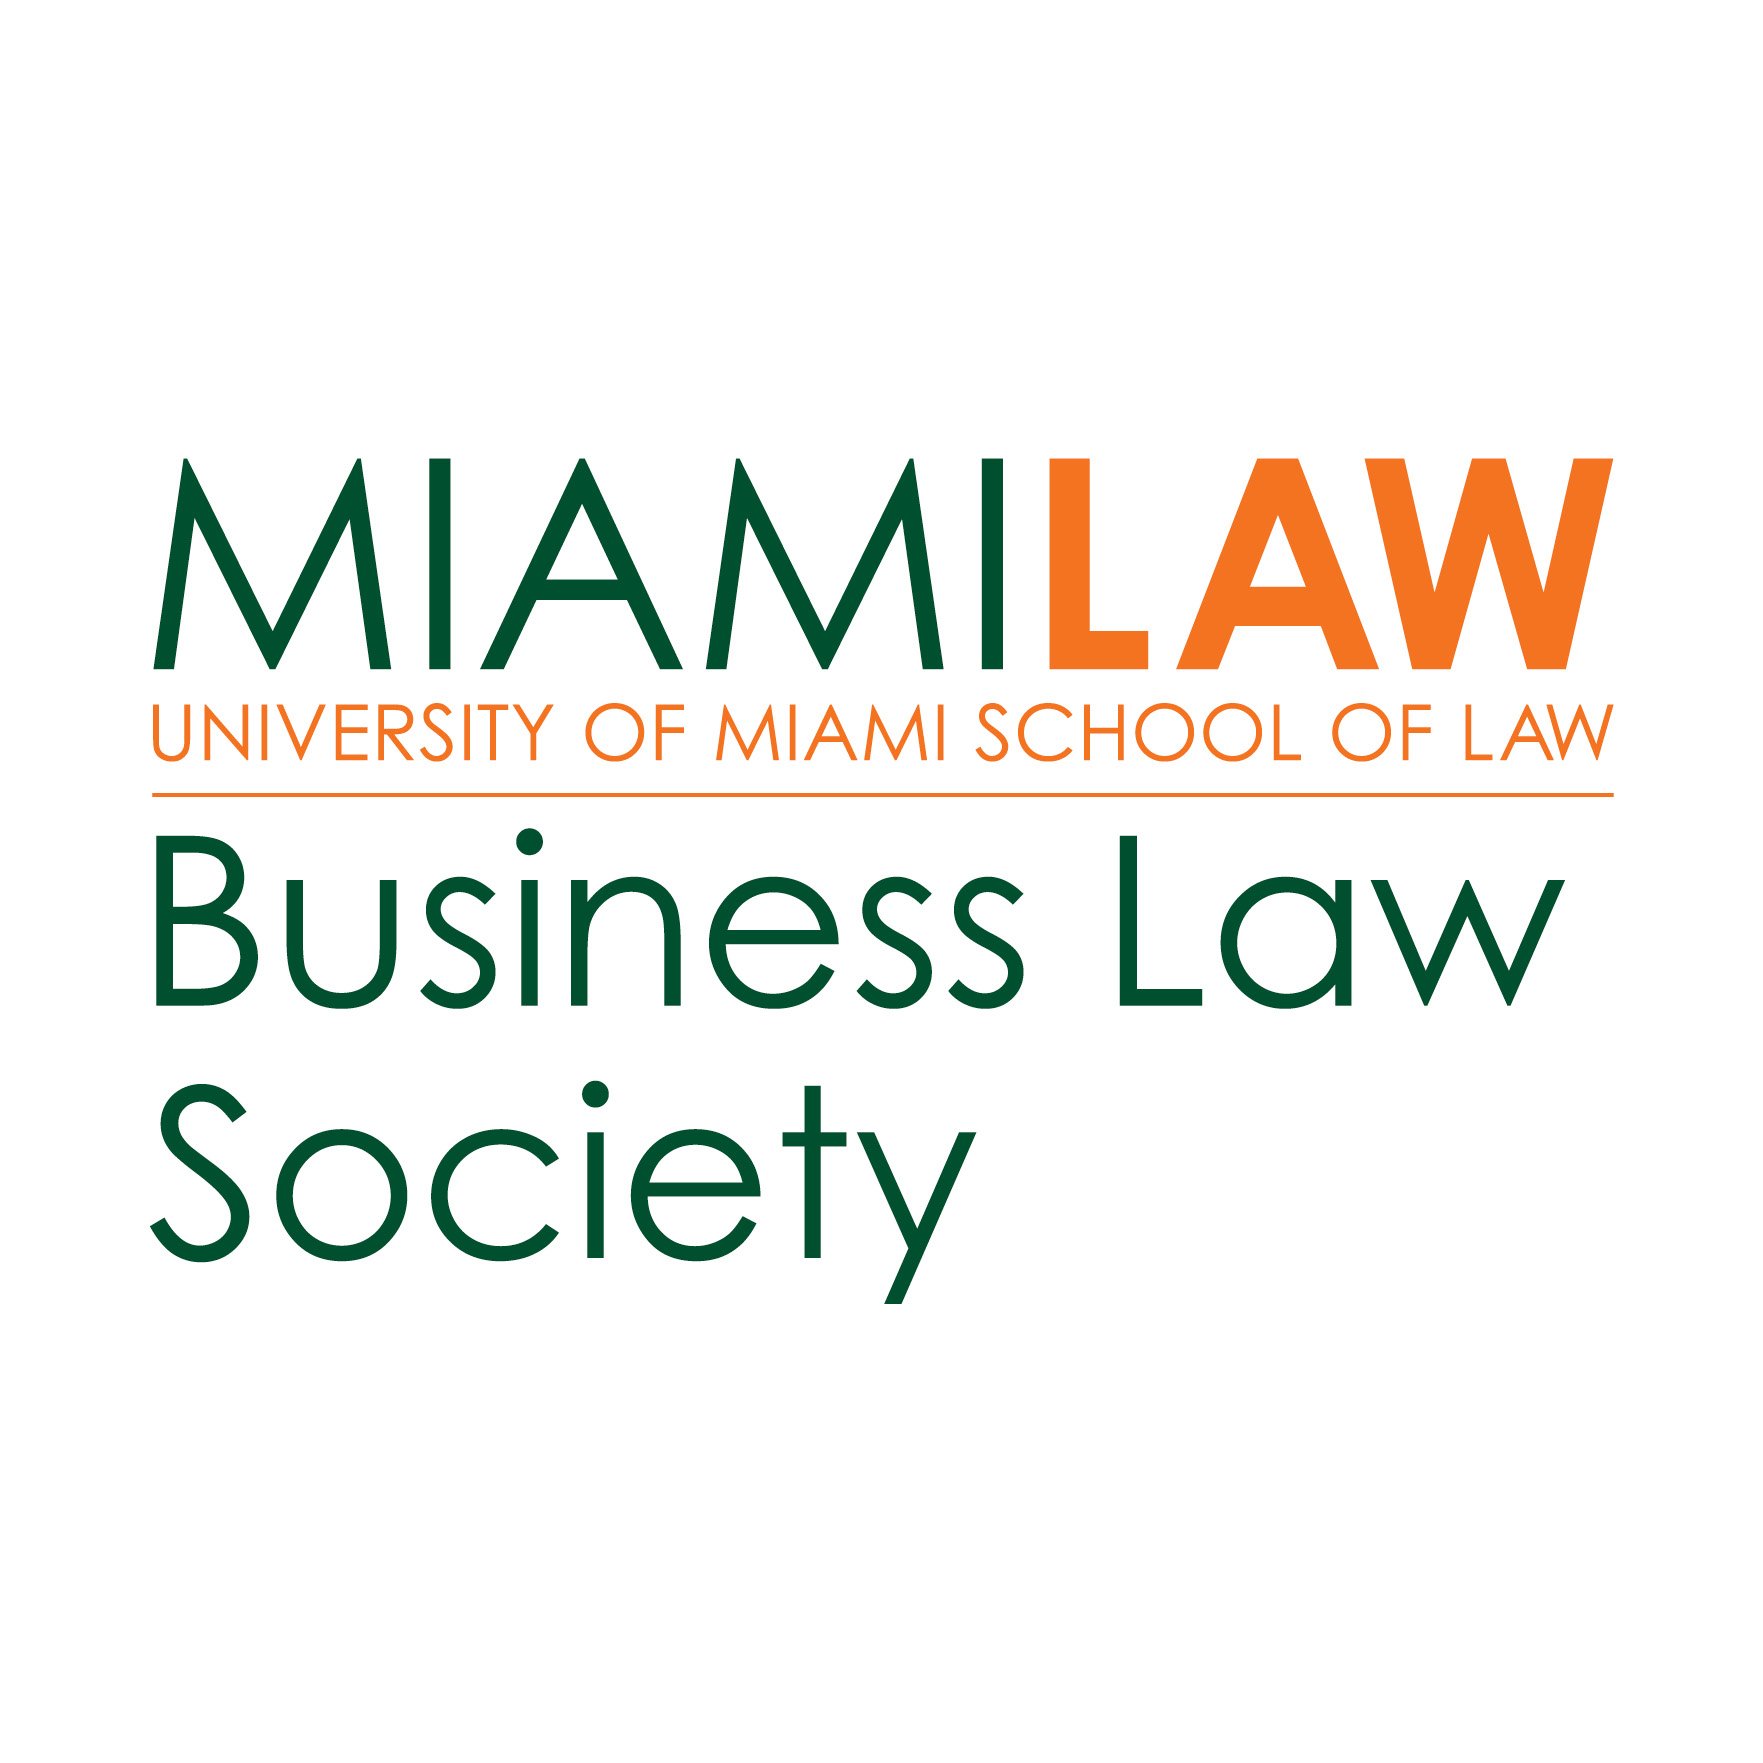 The Business Law Society (BLS) promotes social and academic interaction among Miami Law students interested in various aspects of Business Law.